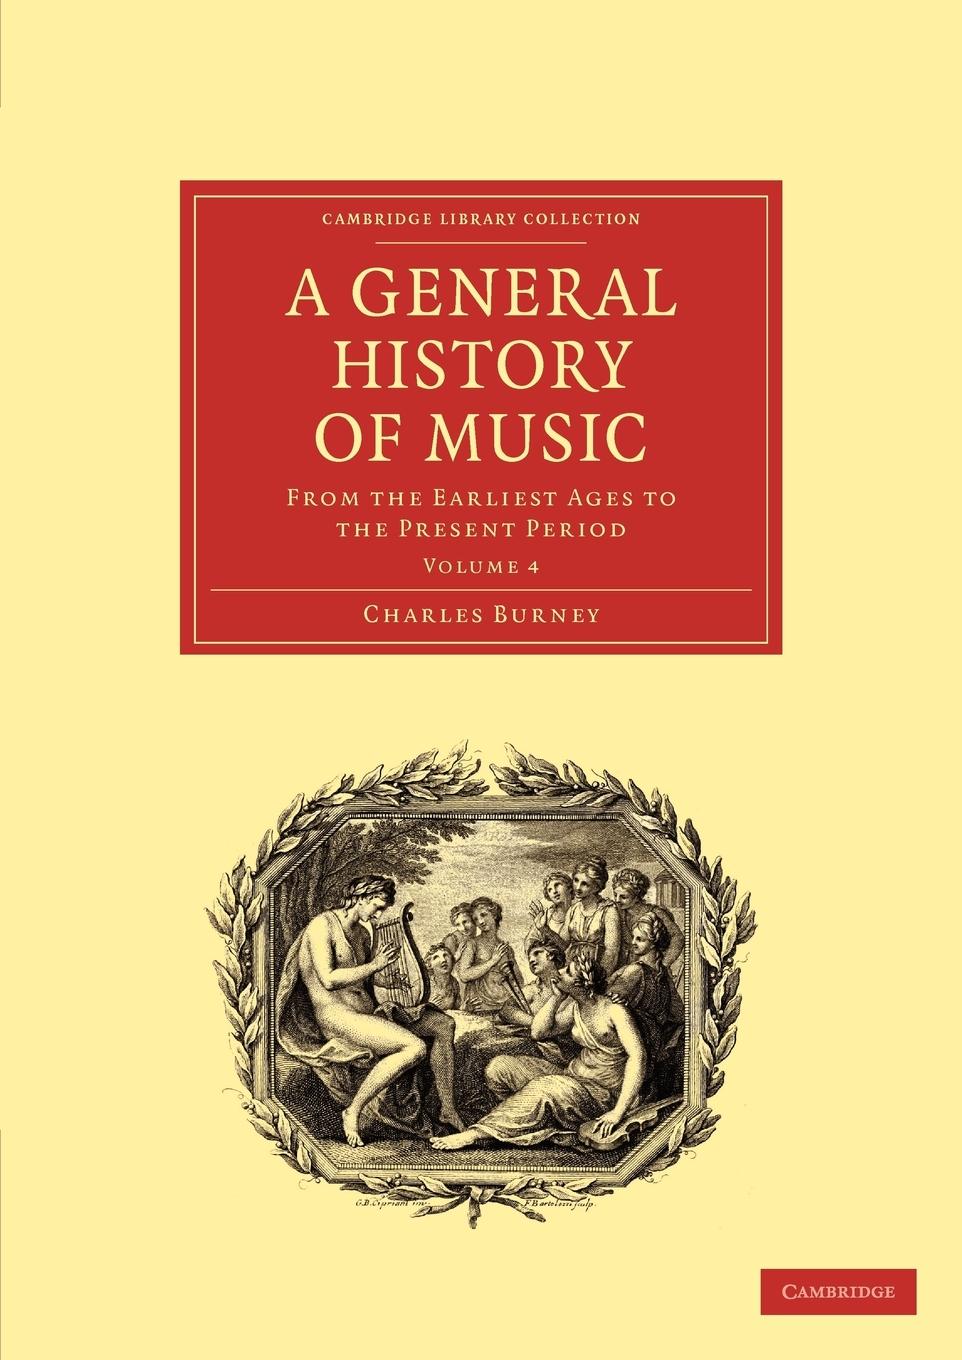 A General History of Music - Volume 4 - Burney, Charles|Charles, Burney